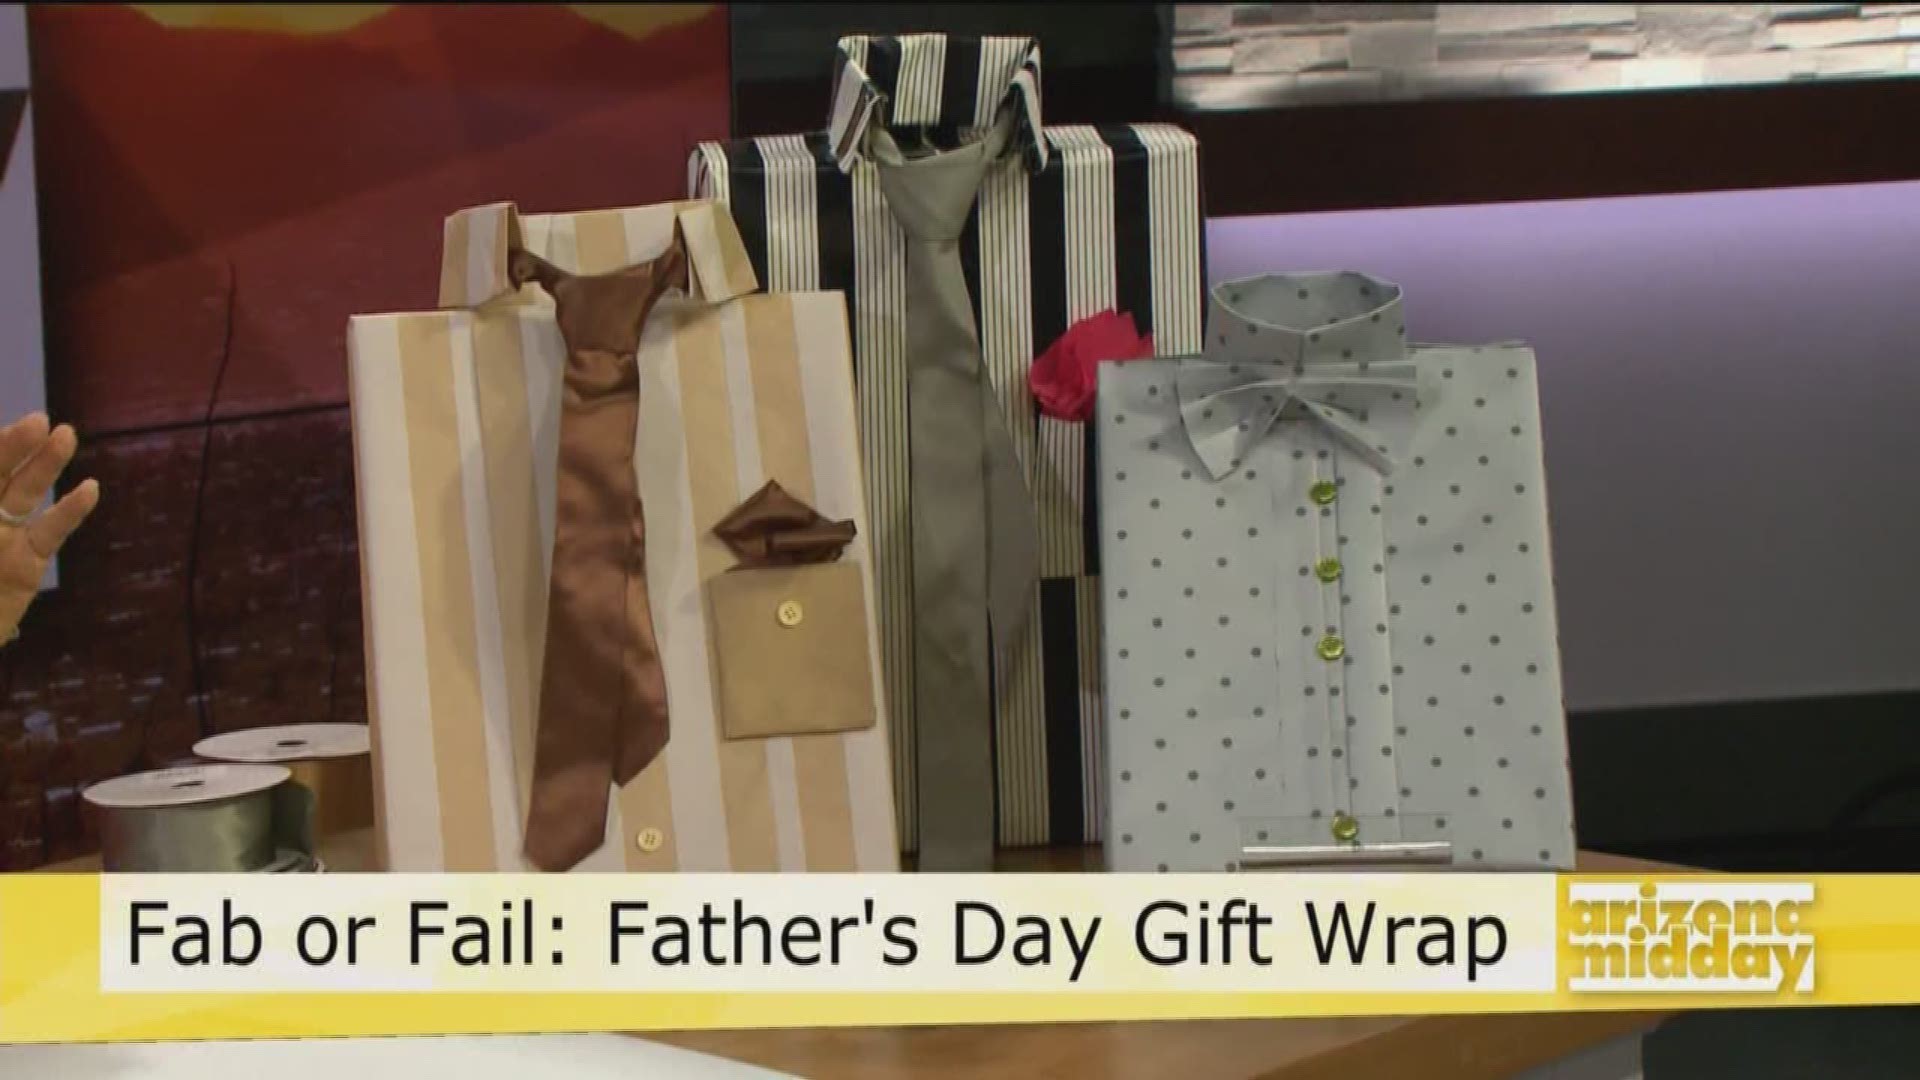 Jan is demonstrating how to make these adorable suit and tie gift boxes made of wrapping paper